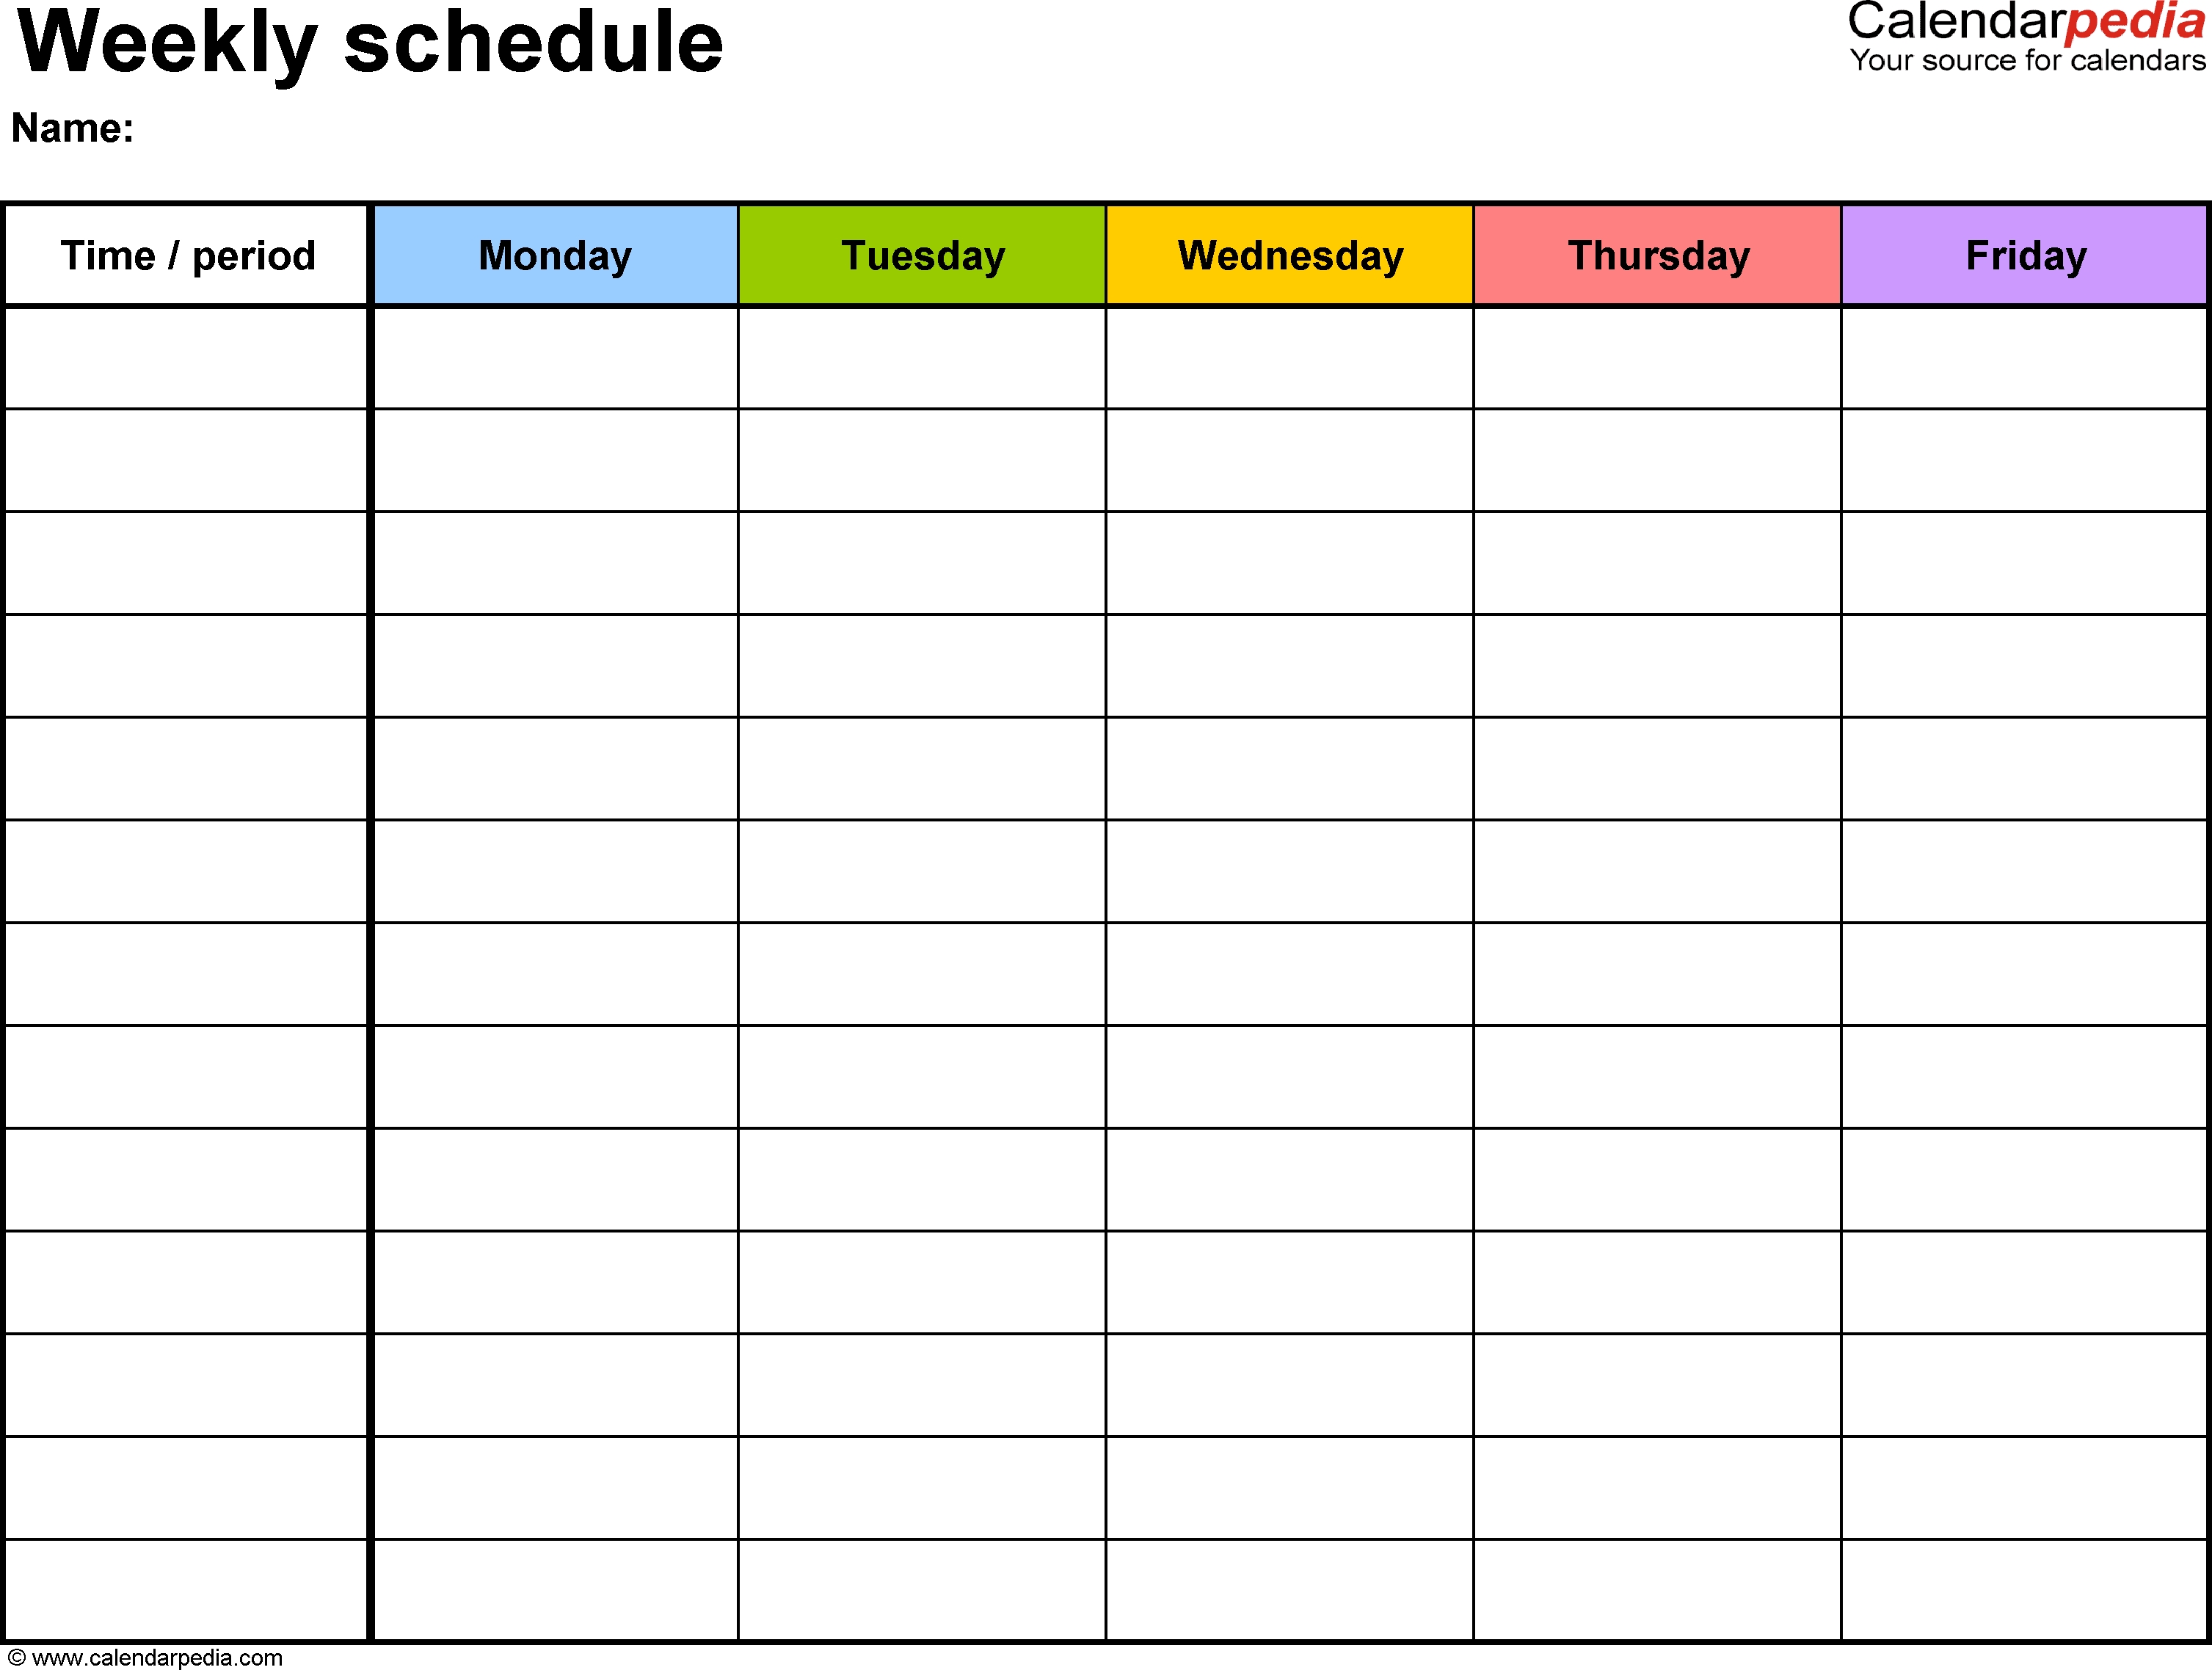 Free Weekly Schedule Templates For Word - 18 Templates-5 Day Monthly Calendar Printable